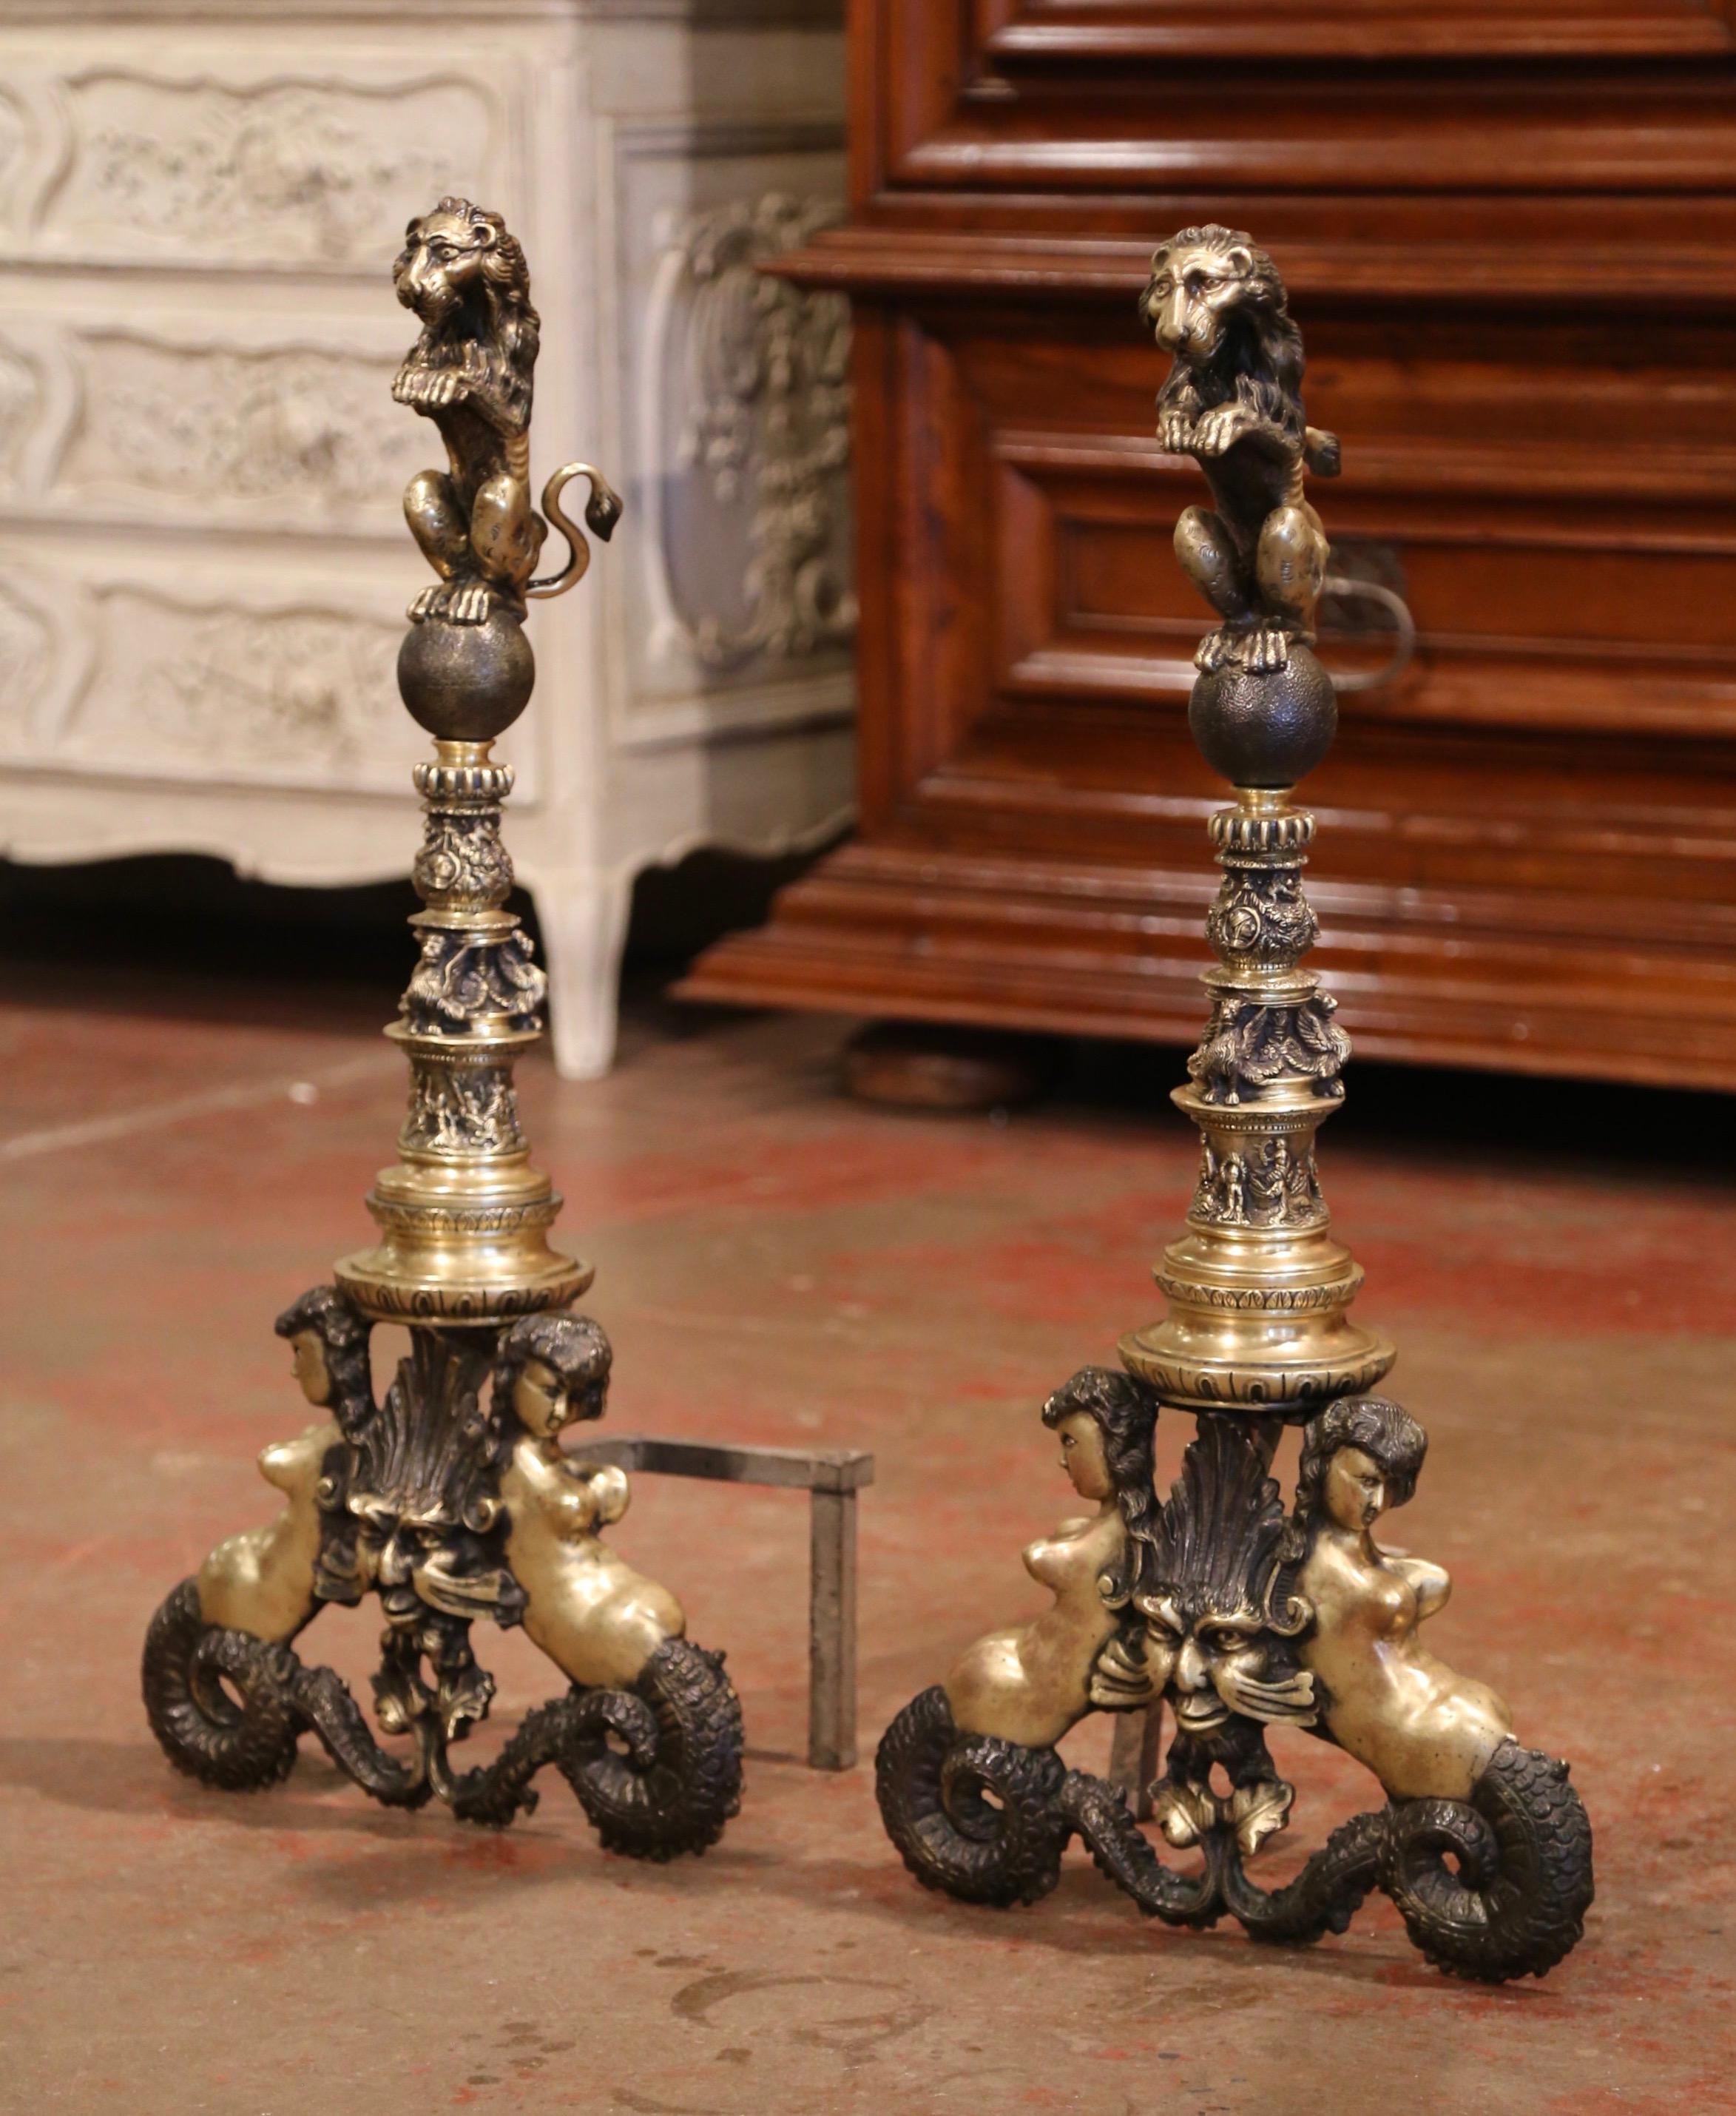 Gilt Pair of Early 19th Century English Two-Tone Bronze Andirons with Lion Sculptures